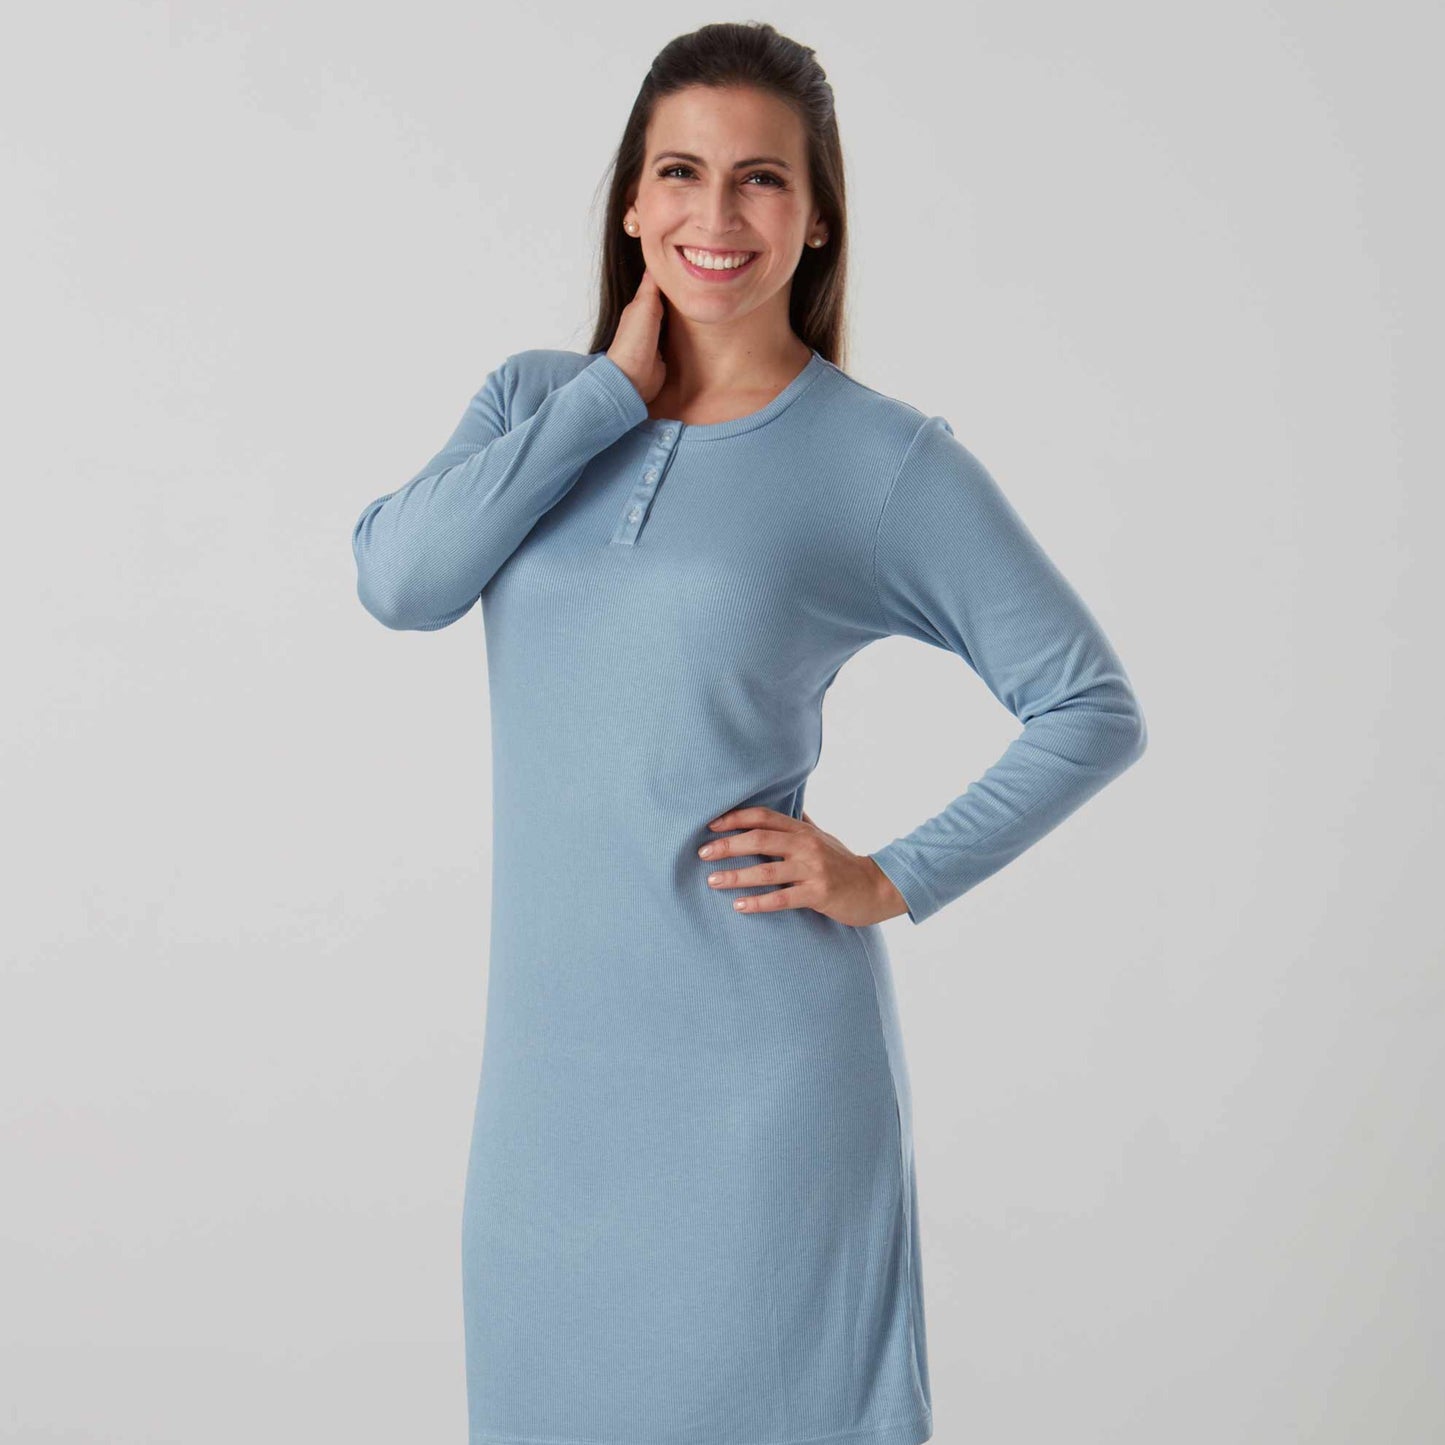 Luxurious knitted long sleeved blue winter nightie - special ladies gift